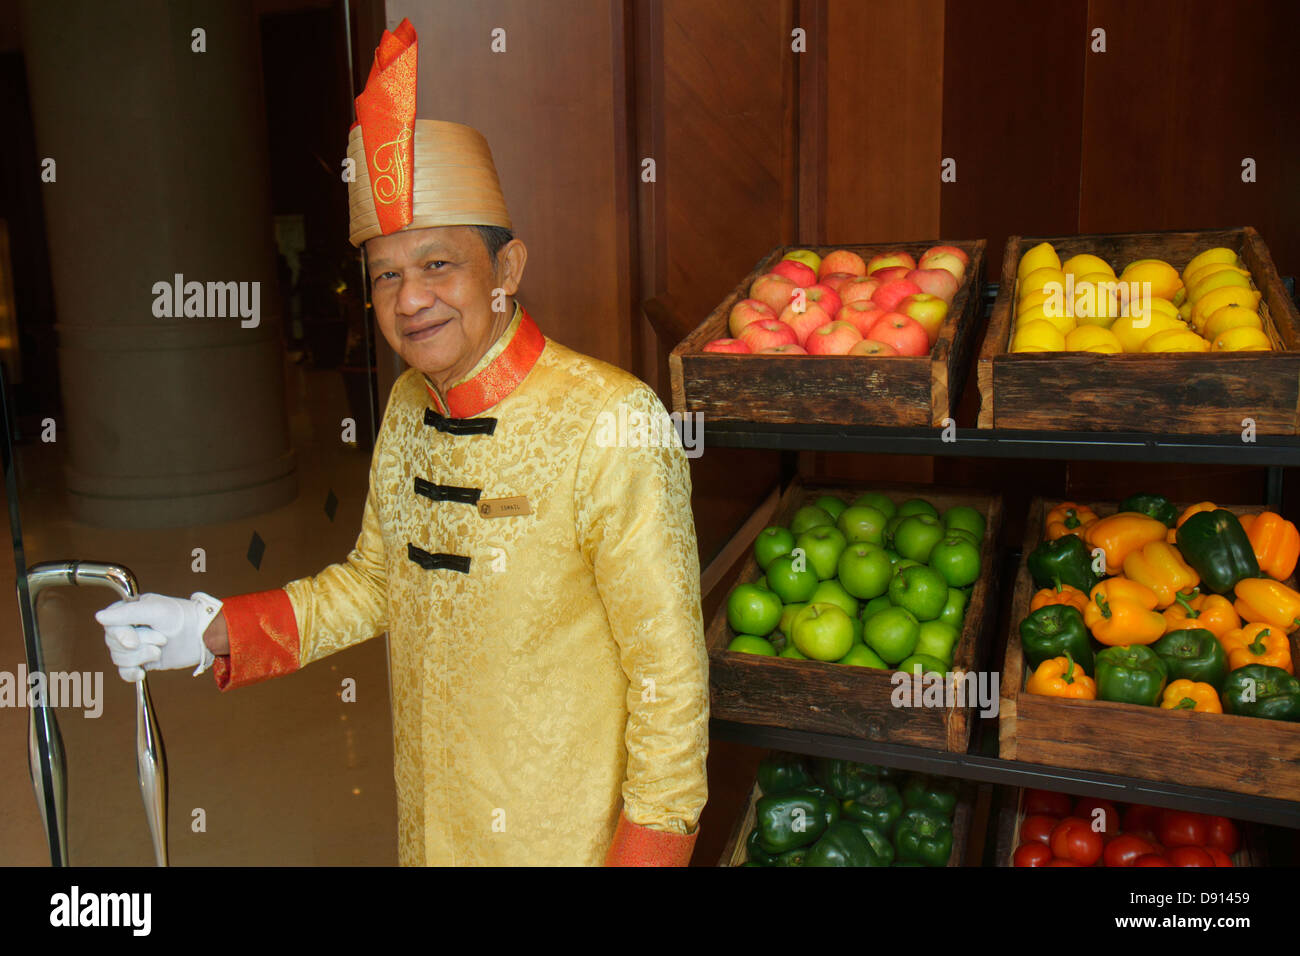 Singapore,Fairmont Singapore,hotel,lobby,doorman,uniform,Asian man men male,employee worker workers working staff,produce,fruit,for sale,Sing130201068 Stock Photo